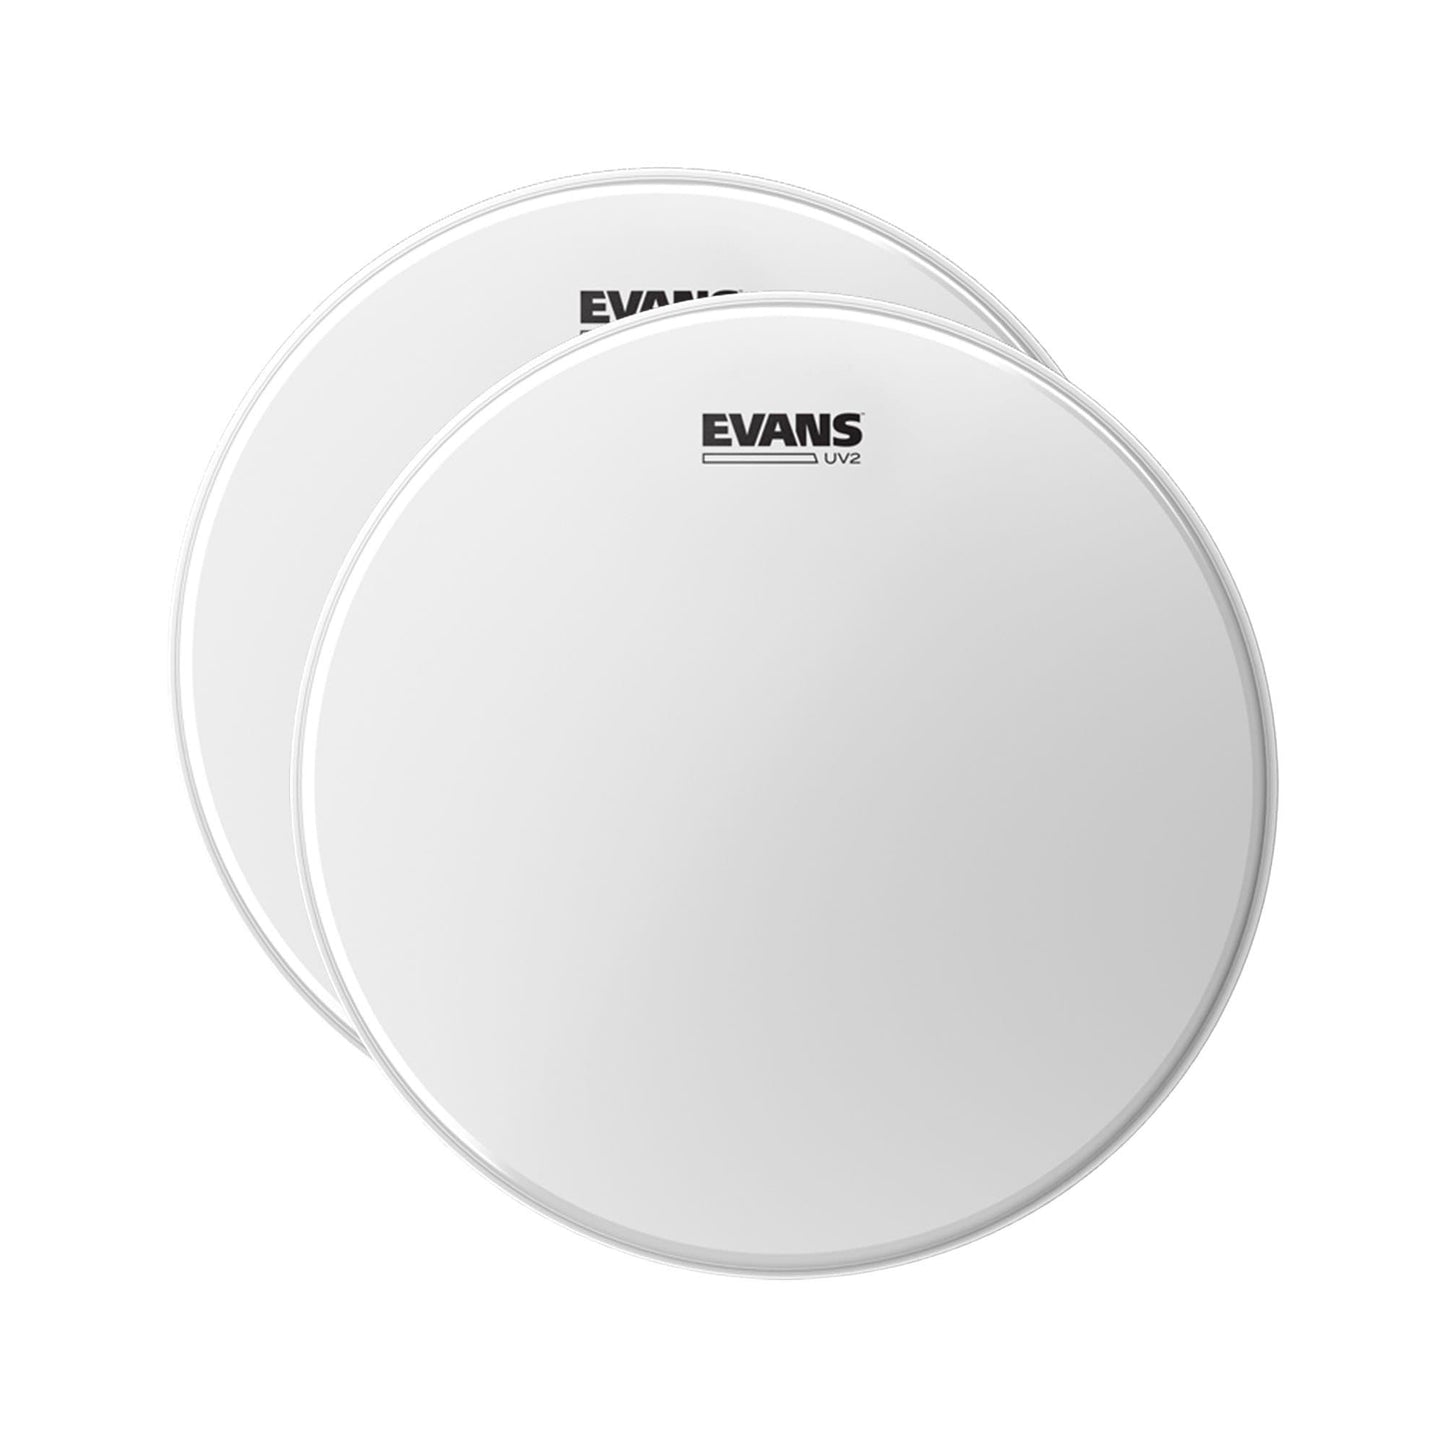 Evans 16" UV2 Coated Drum Head (2 Pack Bundle) Drums and Percussion / Parts and Accessories / Heads